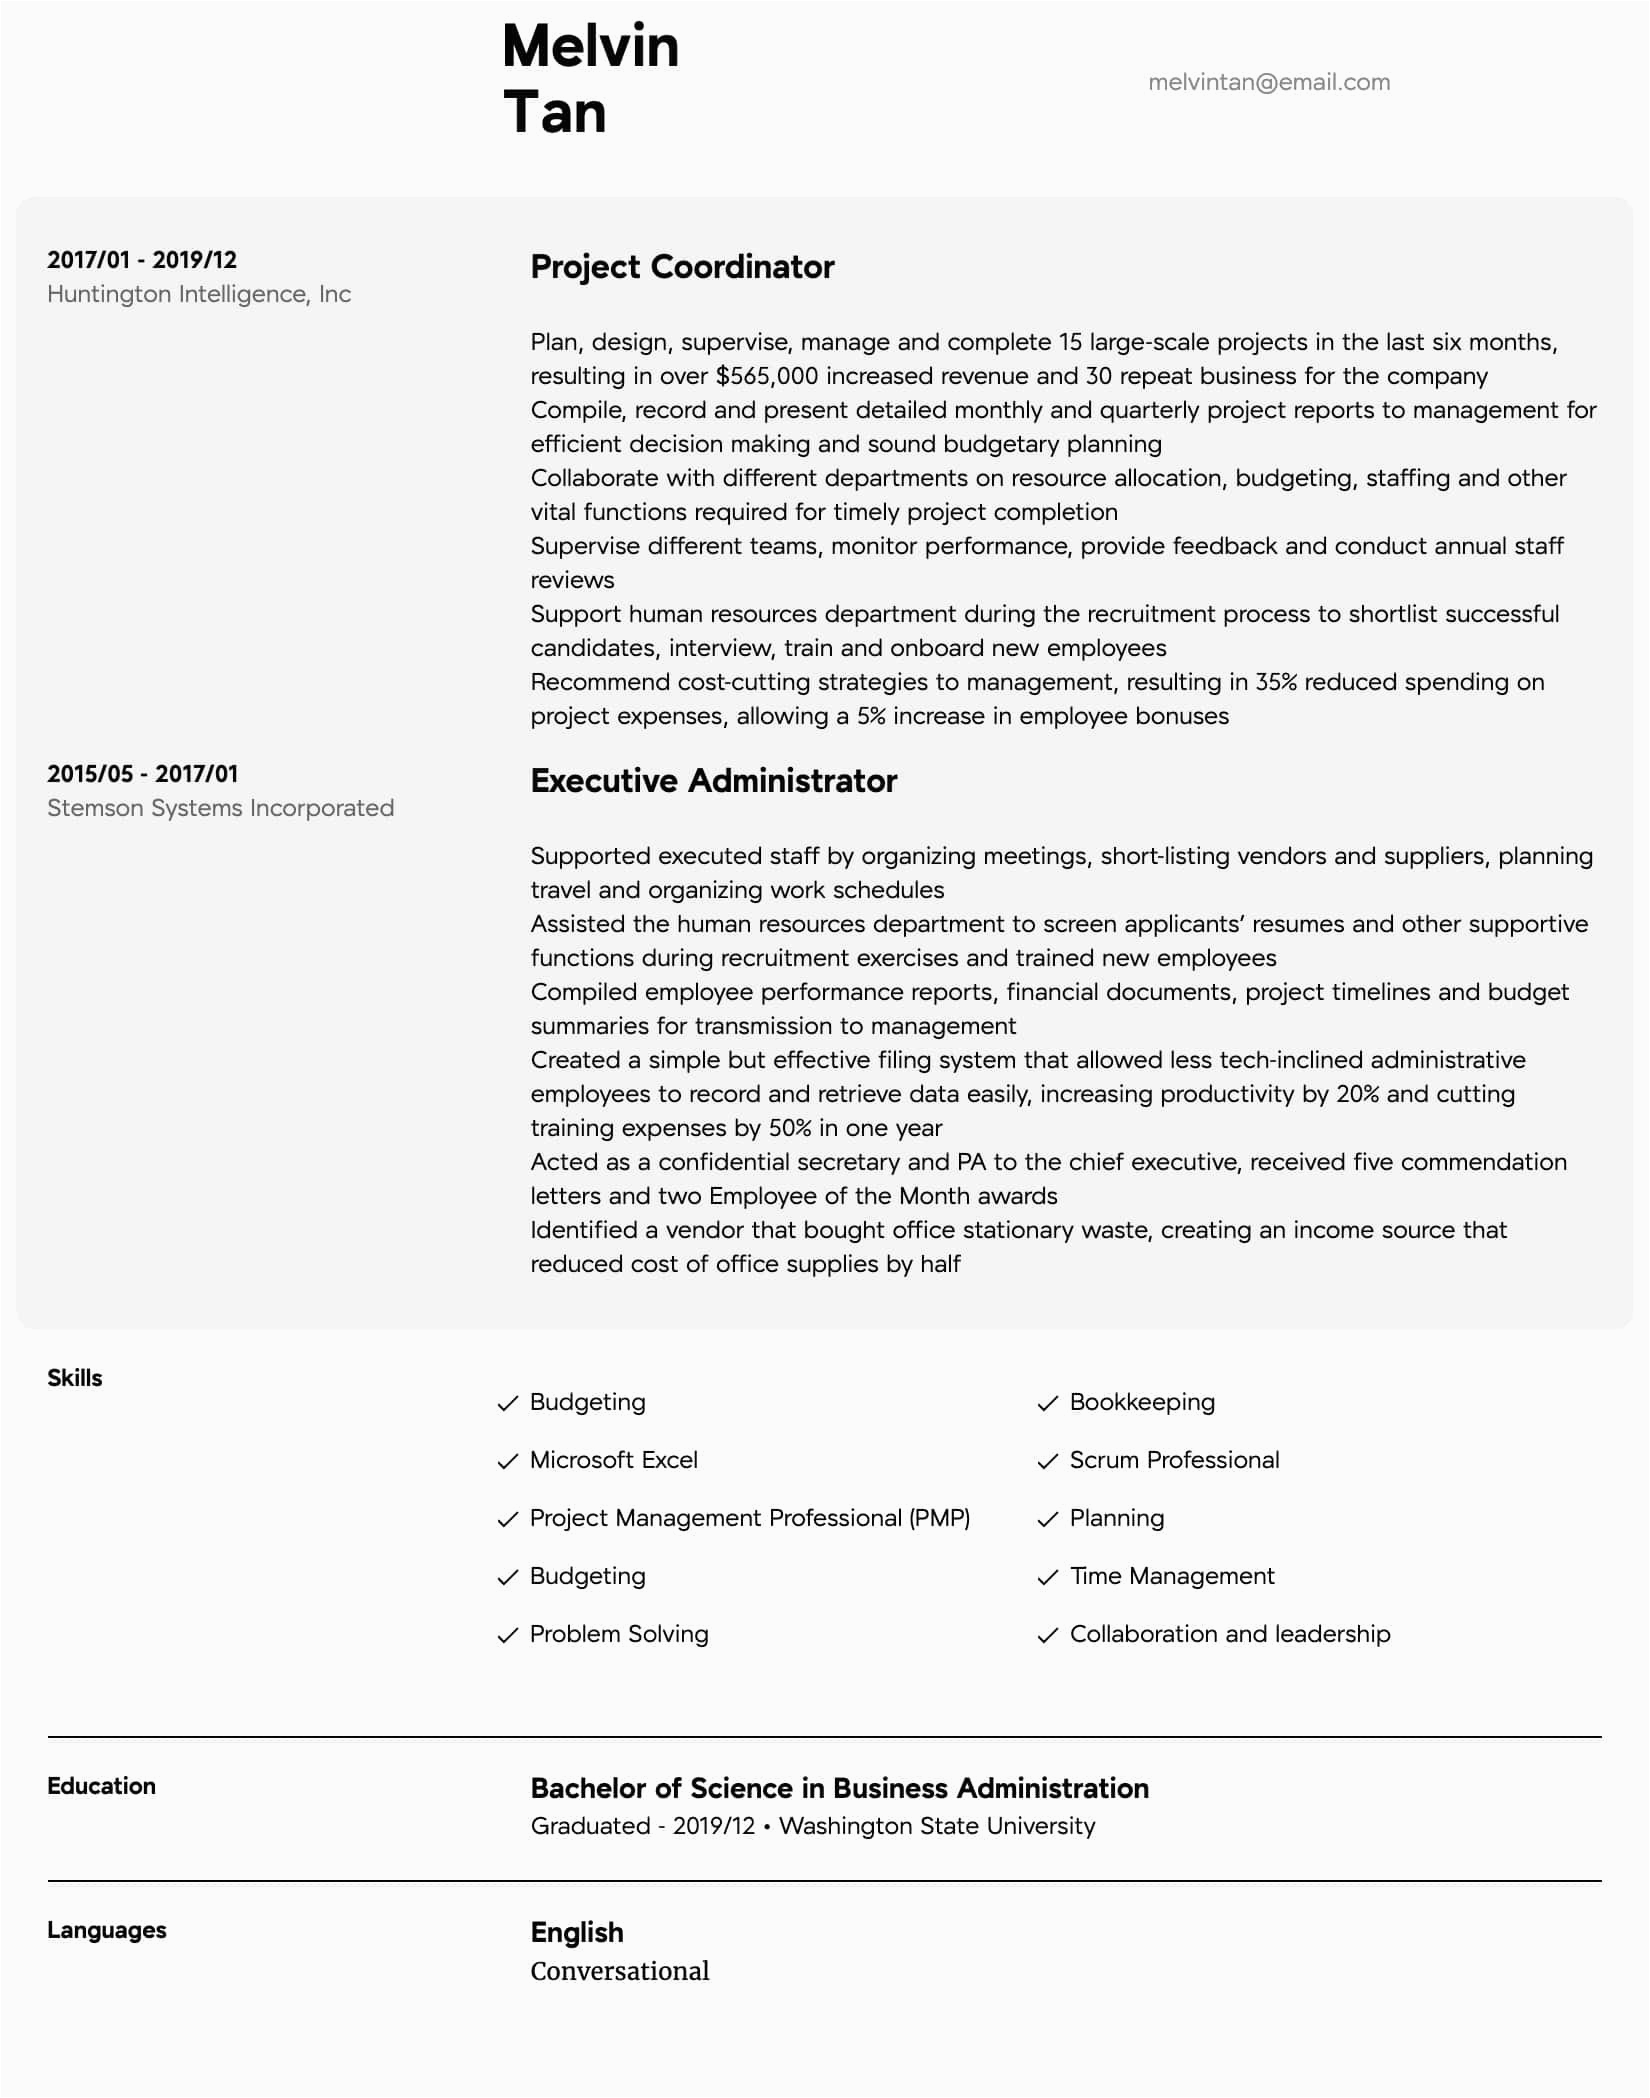 Resume Sample Copy for Project Coordinator for Usa Project Coordinator Resume Samples All Experience Levels